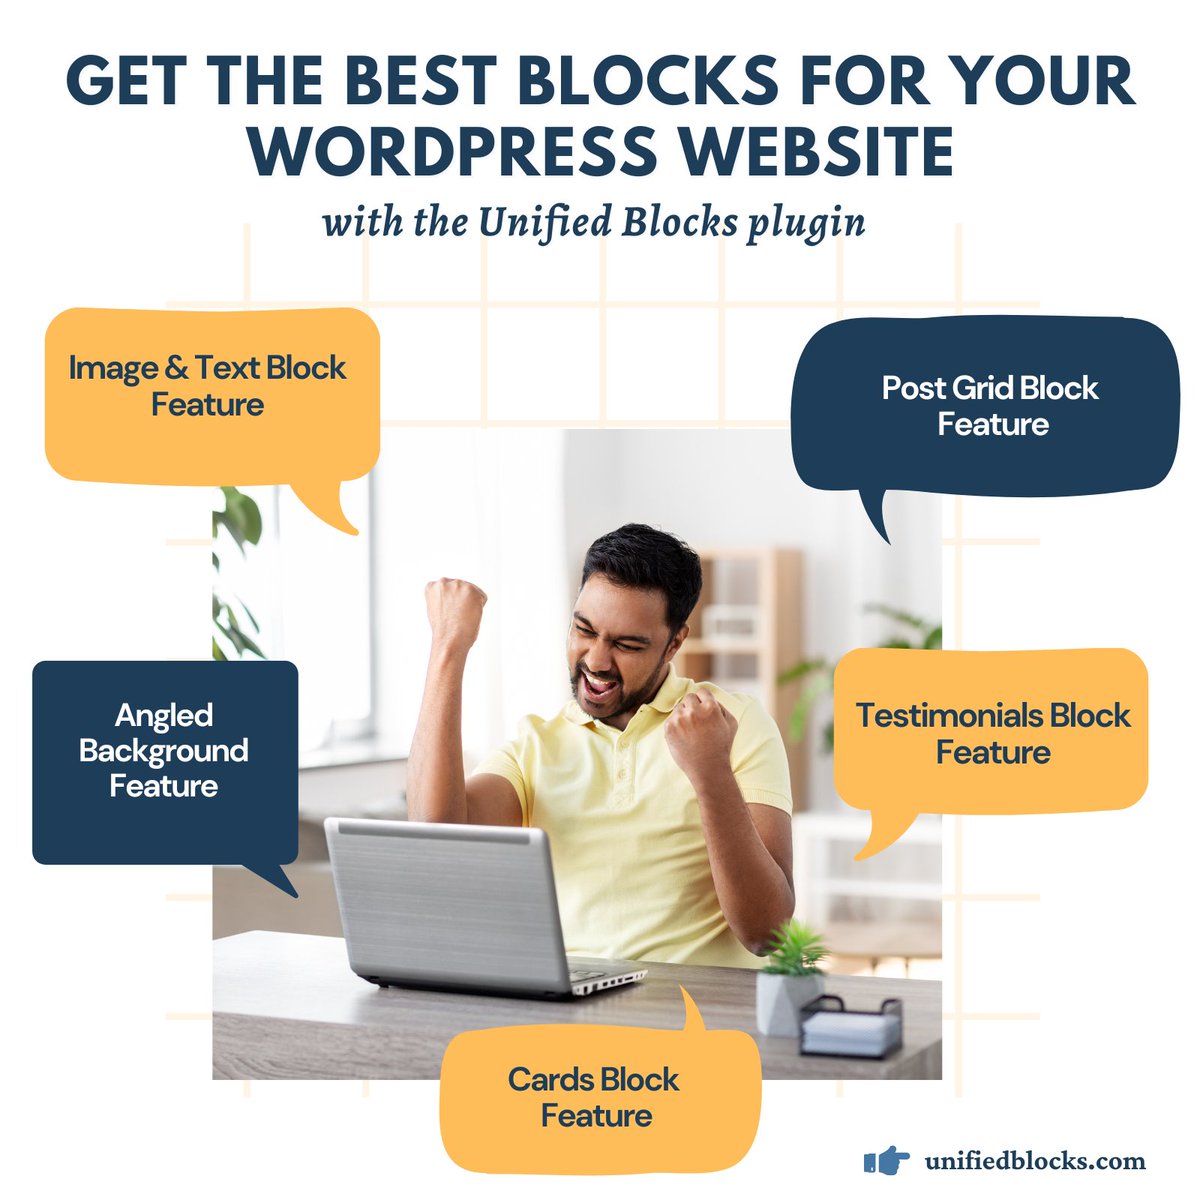 If you want to build or edit your #WordPresswebsite fast & easily, then you should add the Unified Blocks #plugin.

With its features, you can apply that unique design to your website. Making it look more professional.

👉 unifiedblocks.com

#wordpress #wordpressdevelopers